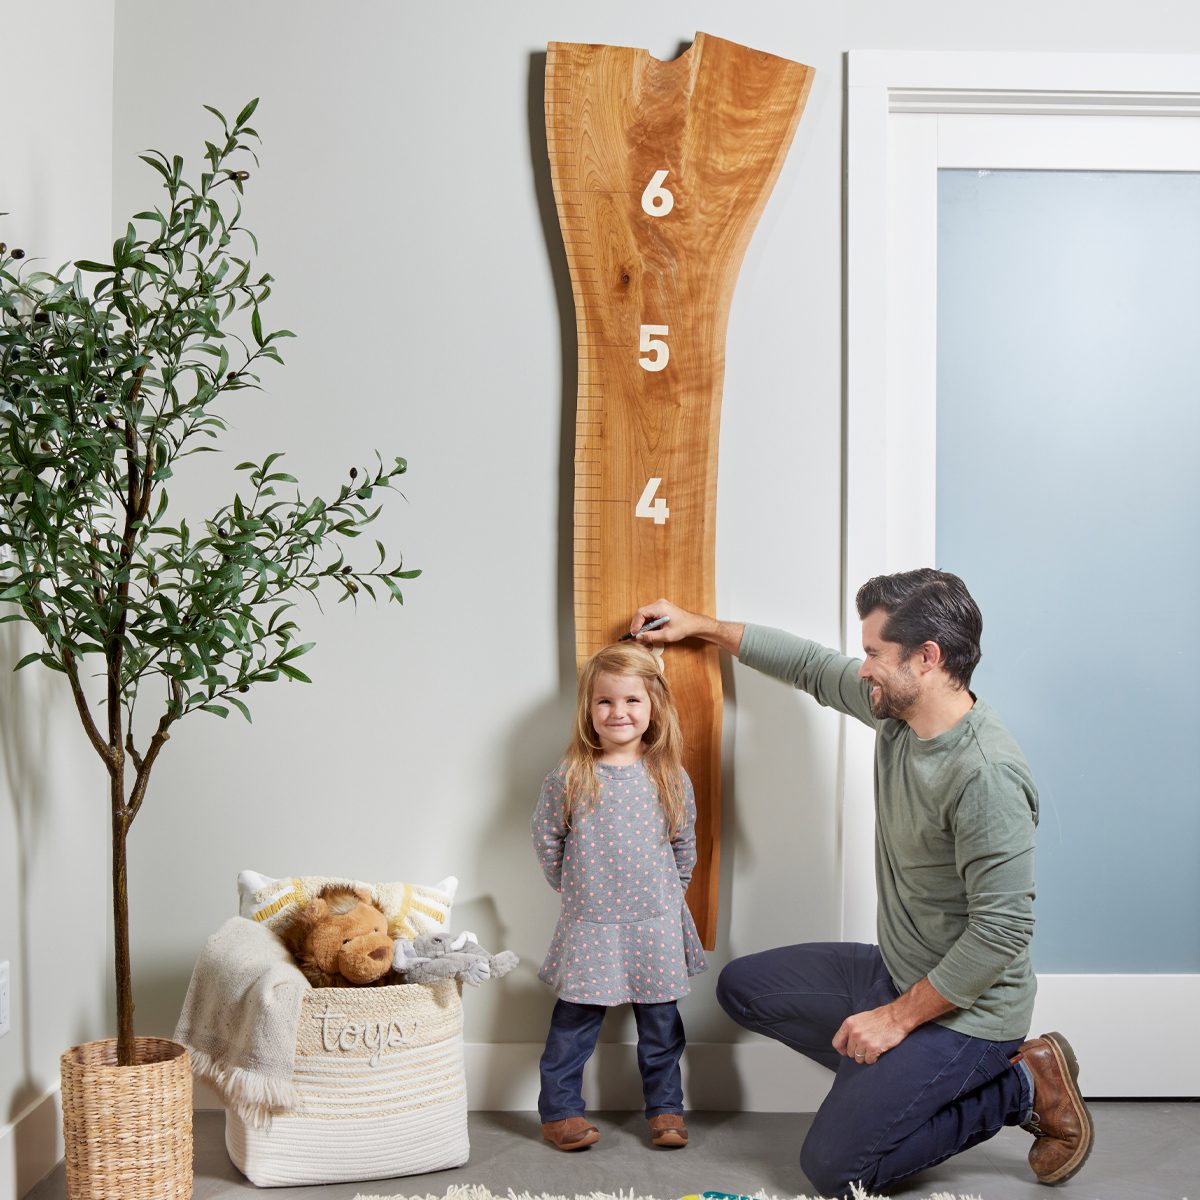 Fh23djf 622 51 072 How To Create Custom Wood Inlays In A Children's Growth Chart